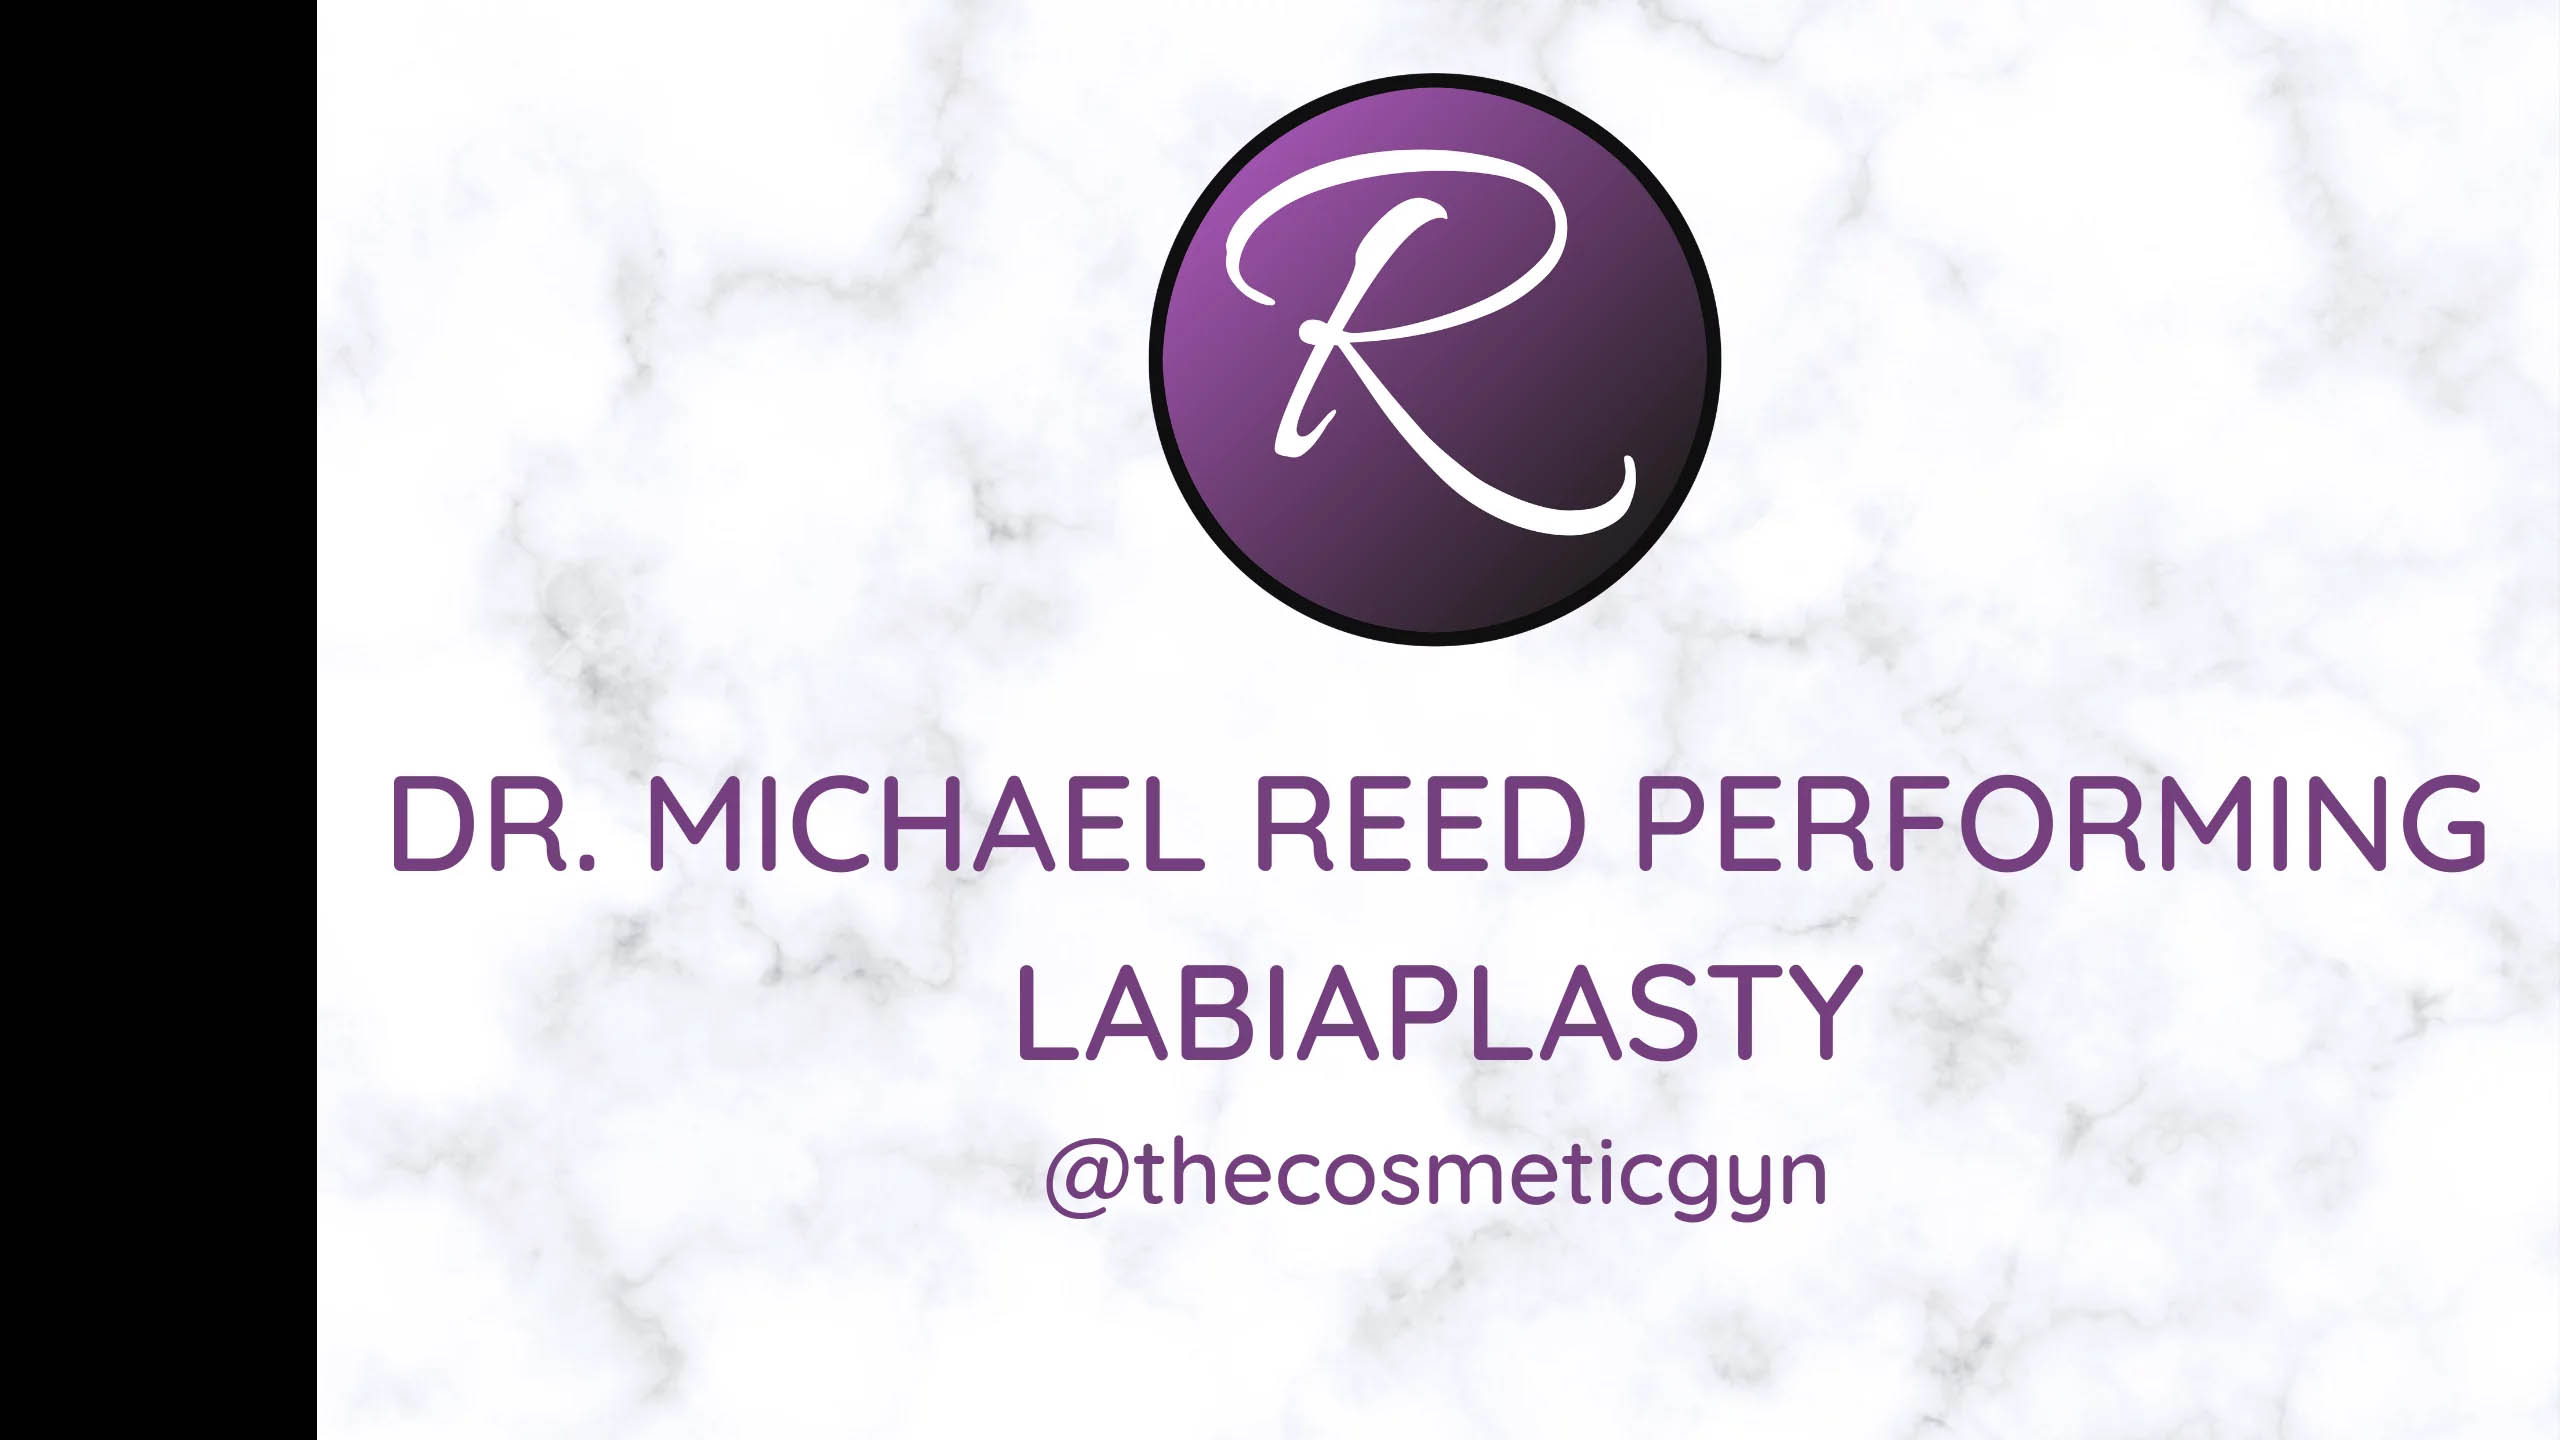 Dr. Michael Reed Performing Labiaplasty